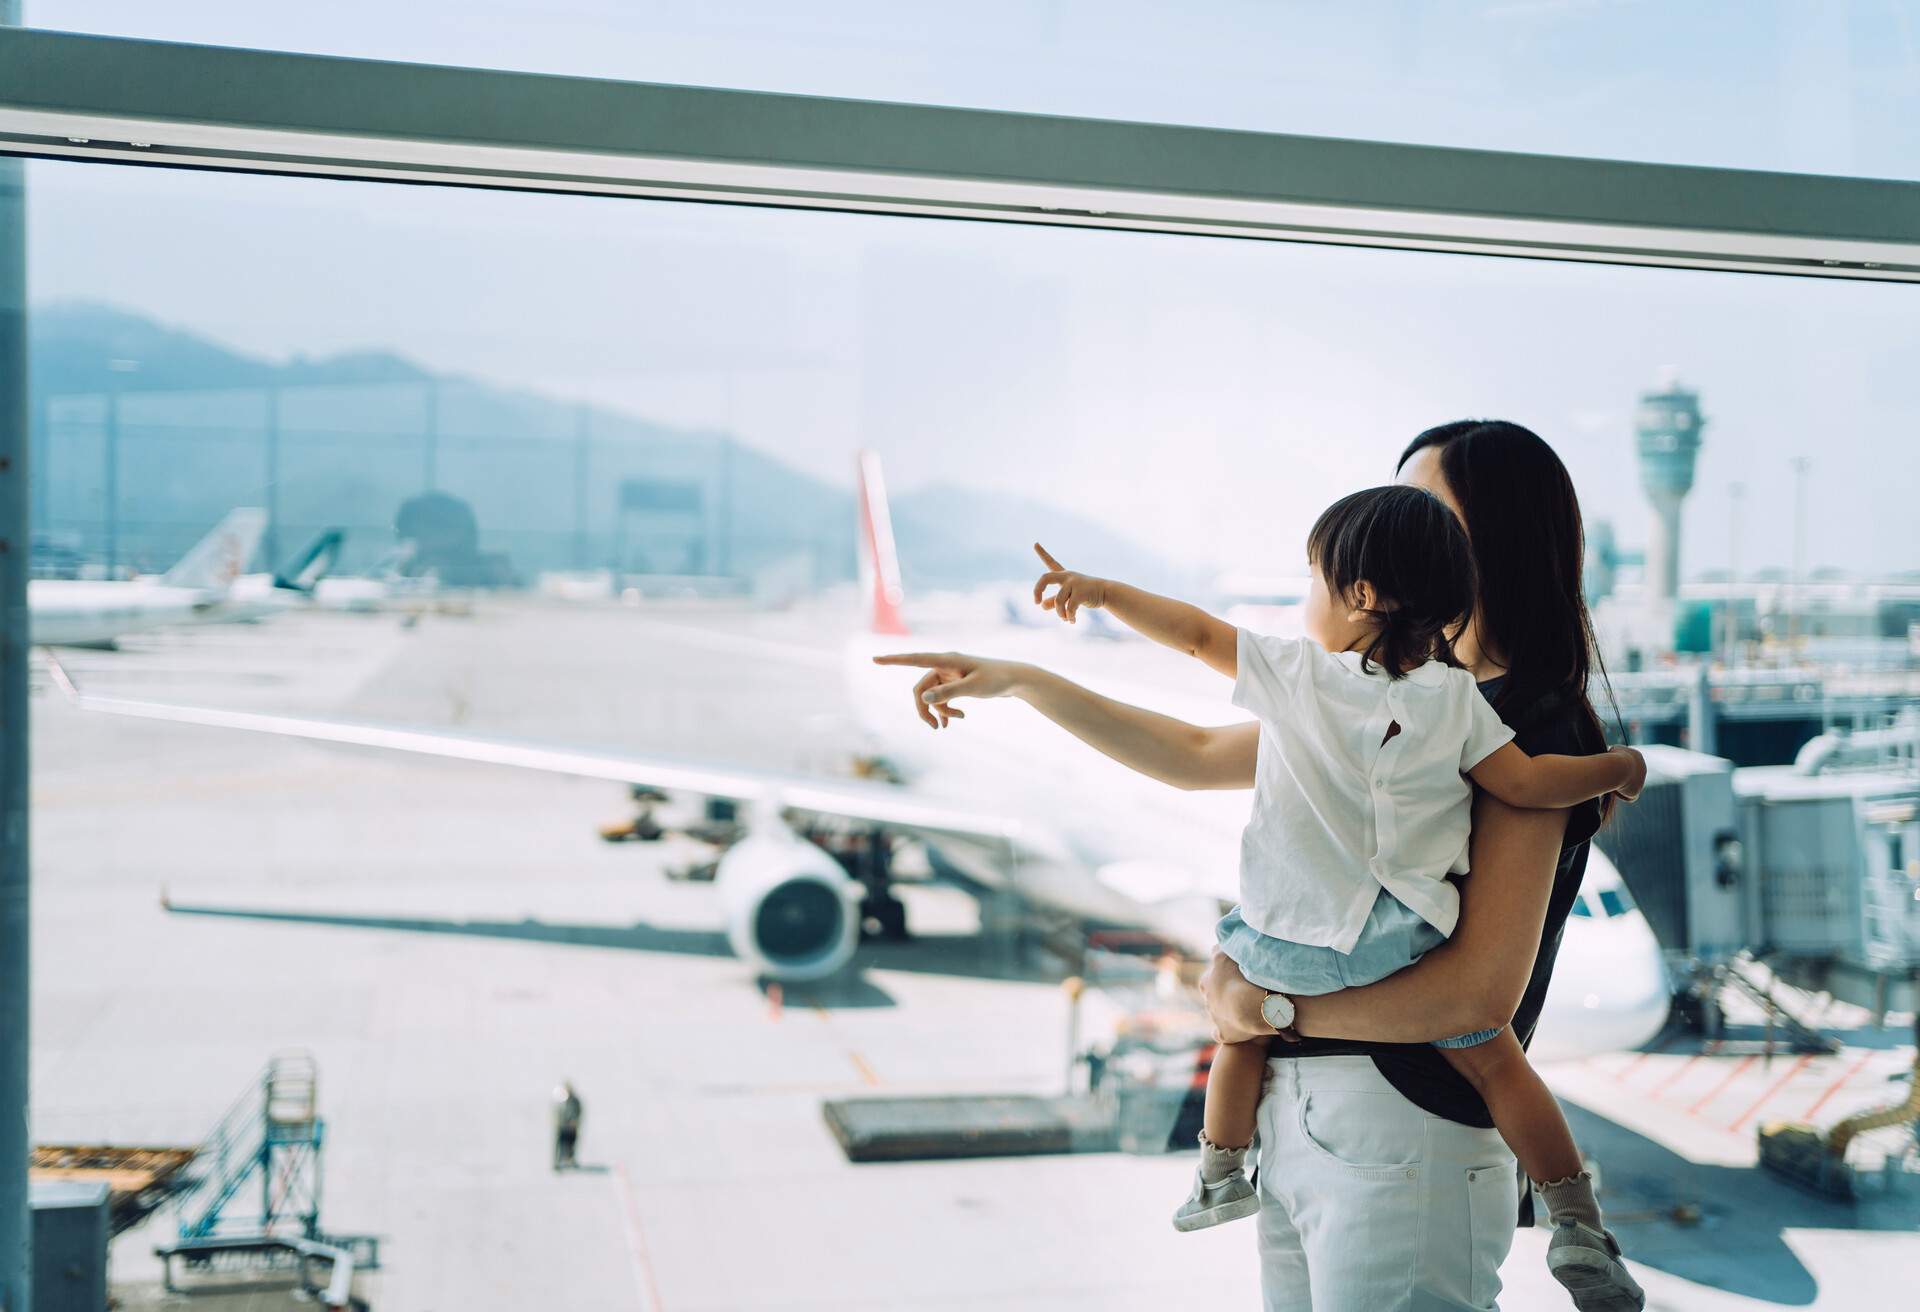 PEOPLE_FAMILY_AIRPORT_PLANE